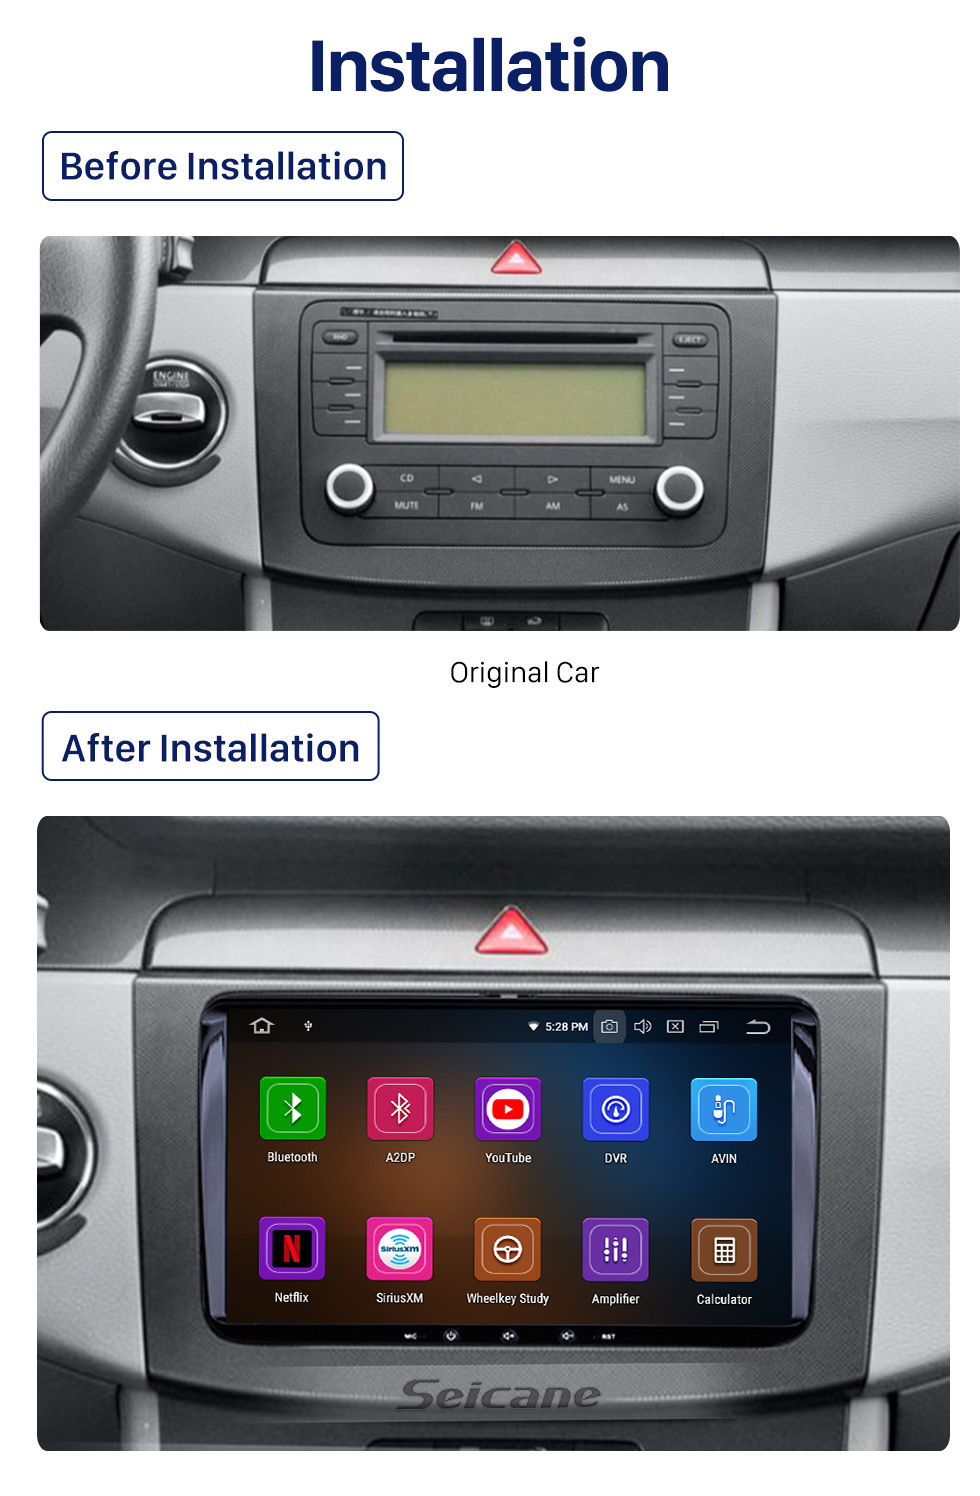 Seicane VW Volkswagen Universal SKODA Seat Android 10.0 GPS Navigation Car DVD Player System Support Rearview Camera Bluetooth Radio OBD2 DVR 3G WiFi HD touch Screen